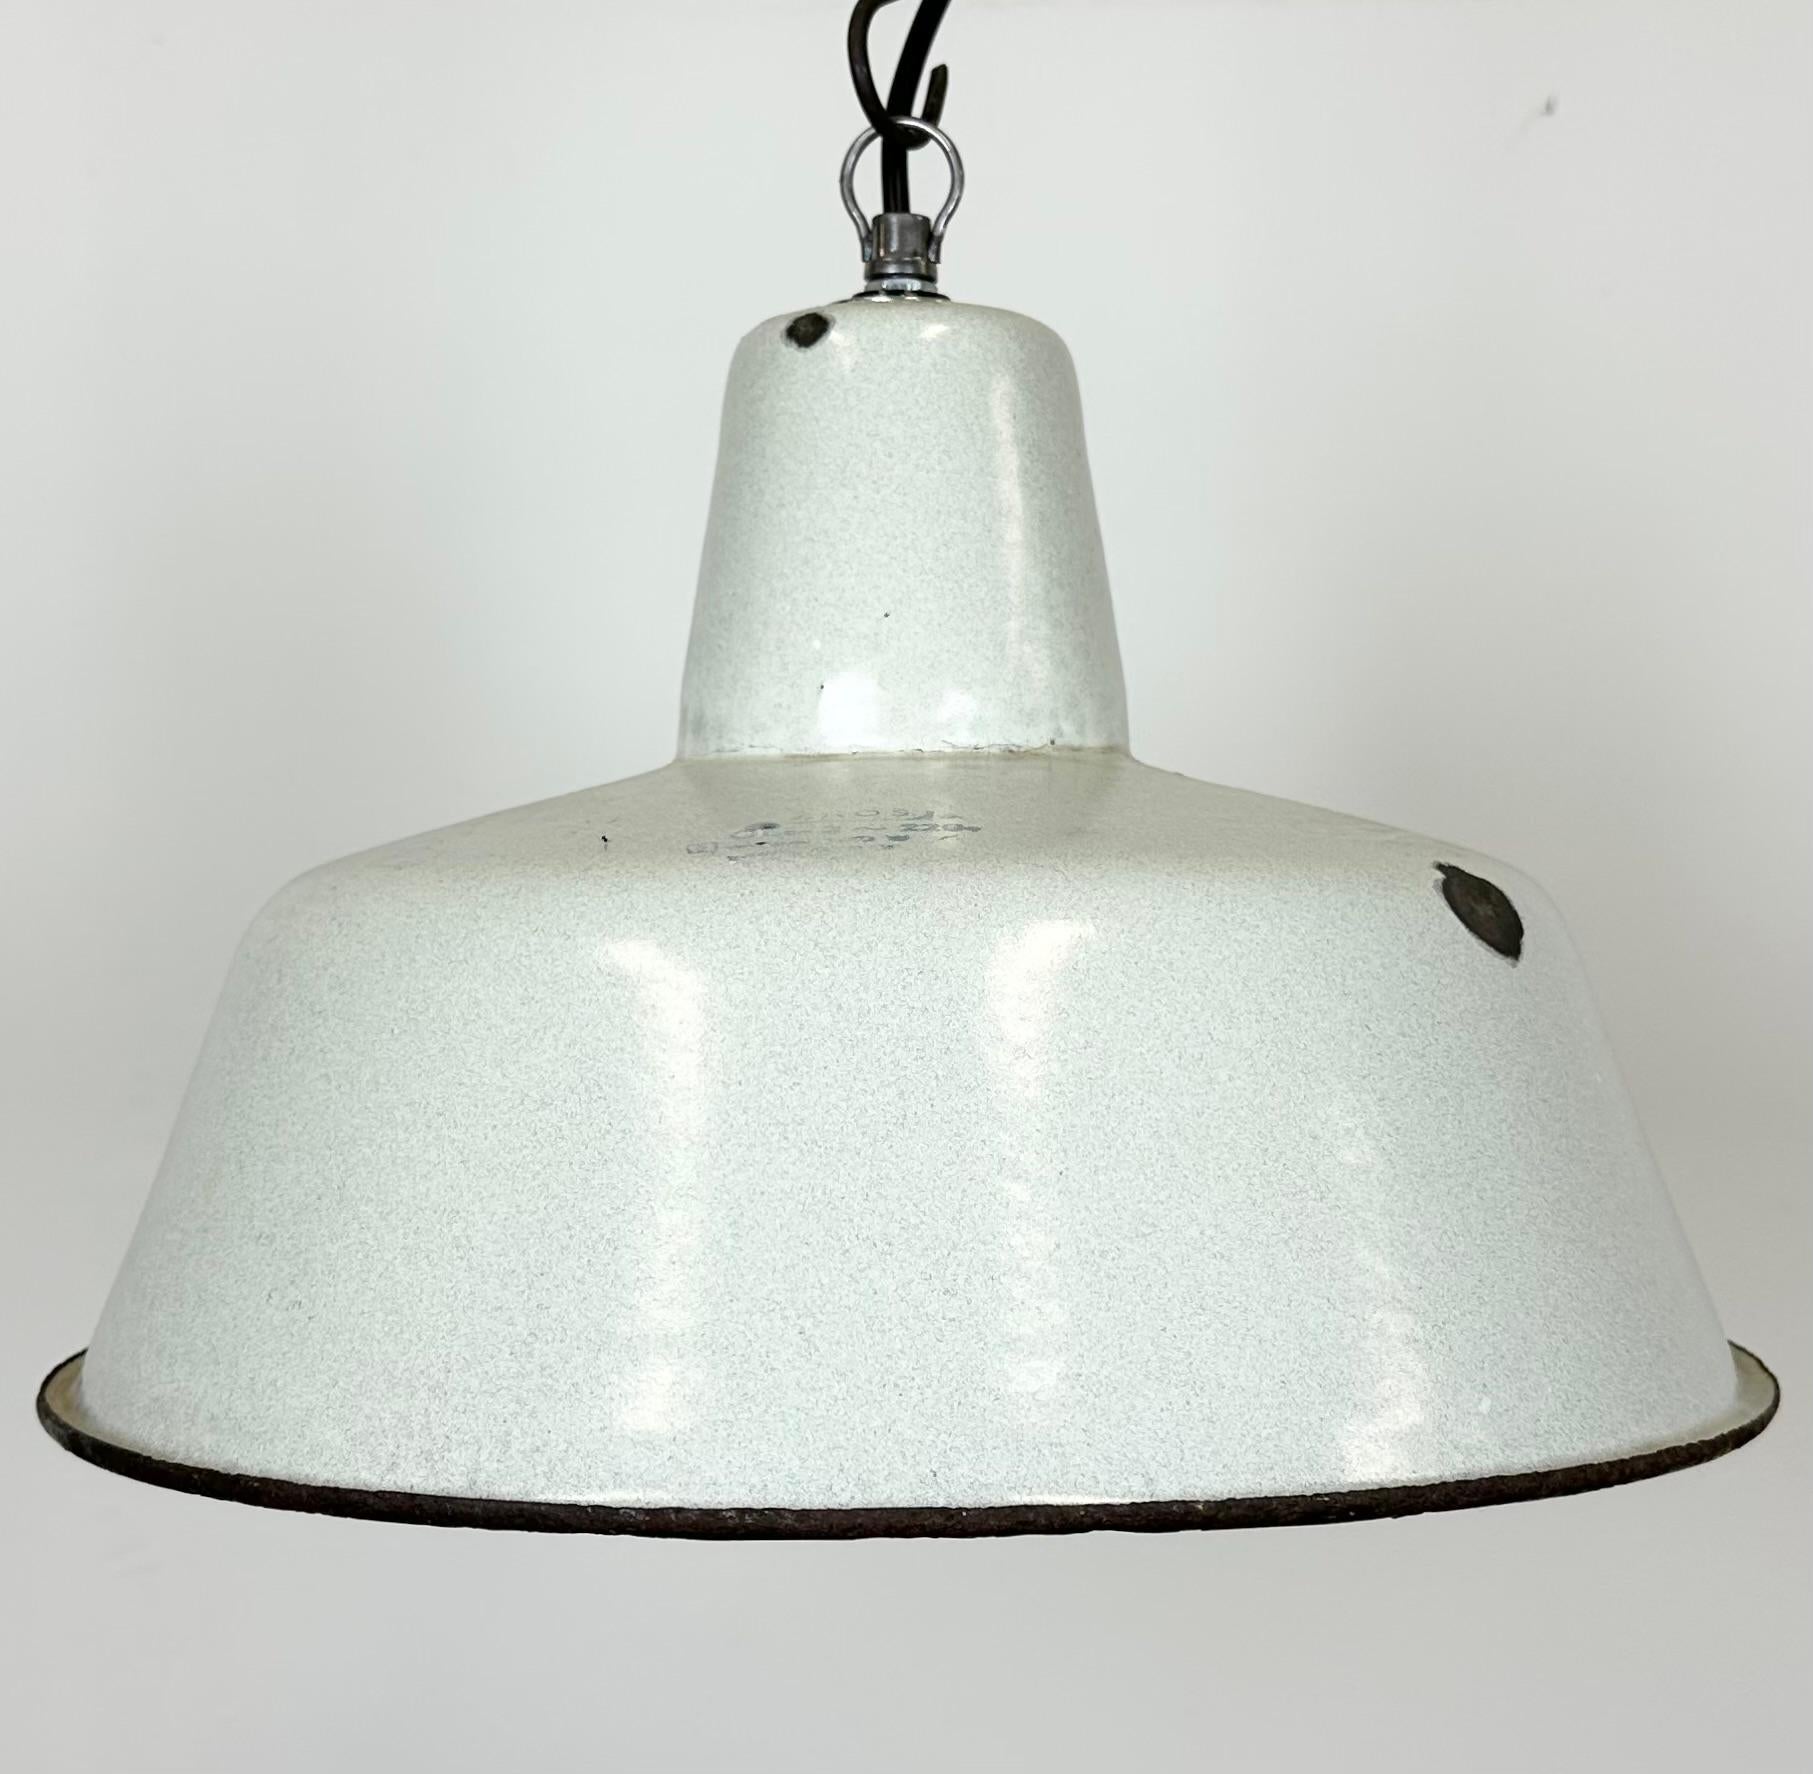 Polish Industrial White Enamel Factory Pendant Lamp from Zaos, 1960s For Sale